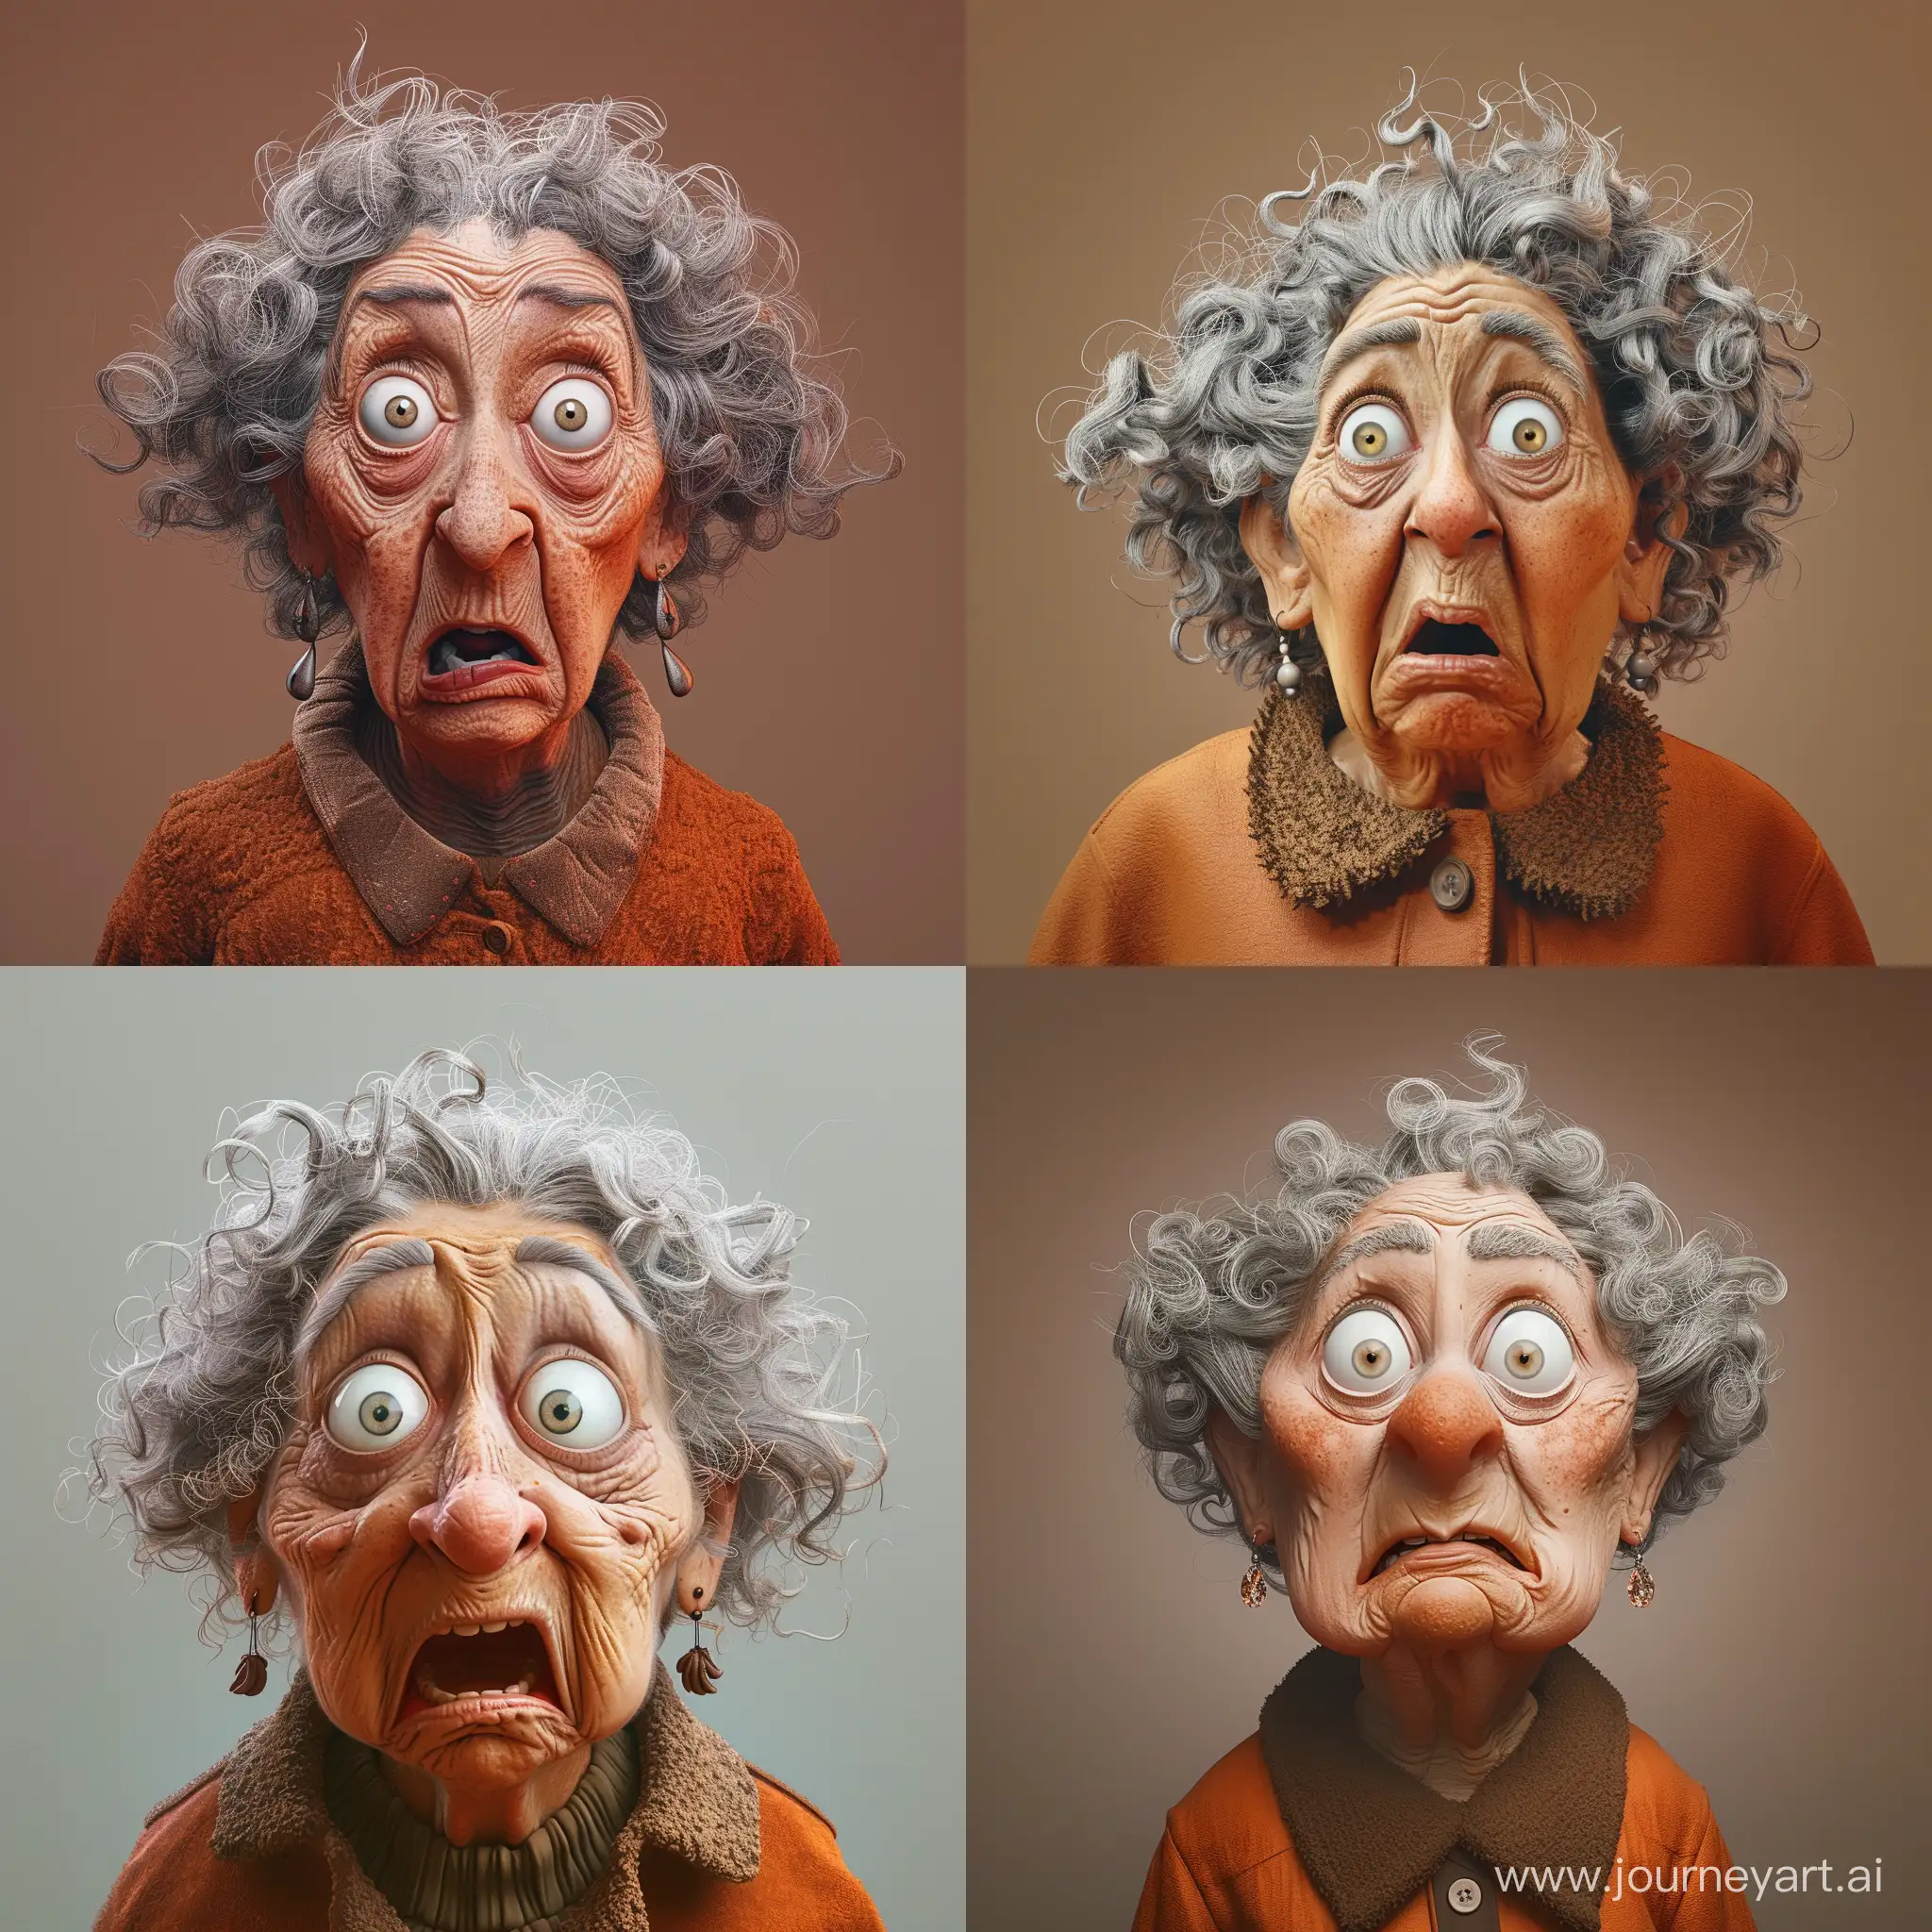 a highly stylized and exaggerated portrait of an elderly woman expressing a comical level of surprise or excitement. The image appears to be digitally manipulated or illustrated to enhance certain features for a humorous or caricatured effect. Her eyes are wide open, her eyebrows are raised high, and her mouth is slightly agape, all accentuating the expression of astonishment. She has a full head of curly gray hair that is tousled, adding to the overall playful nature of the image. The woman is wearing a pair of dangling earrings and is dressed in a brownish-orange jacket with a visibly textured collar, suggesting a cold-weather outfit. The background is a plain solid color that matches the warm tone of her jacket, emphasizing the subject without any distractions. The exaggerated features, combined with the vividness of the expression and the quality of the image, suggest that this portrait may be the work of a digital artist aiming to produce an amusing and endearing character through the use of hyperbolic facial expressions and rich detail.